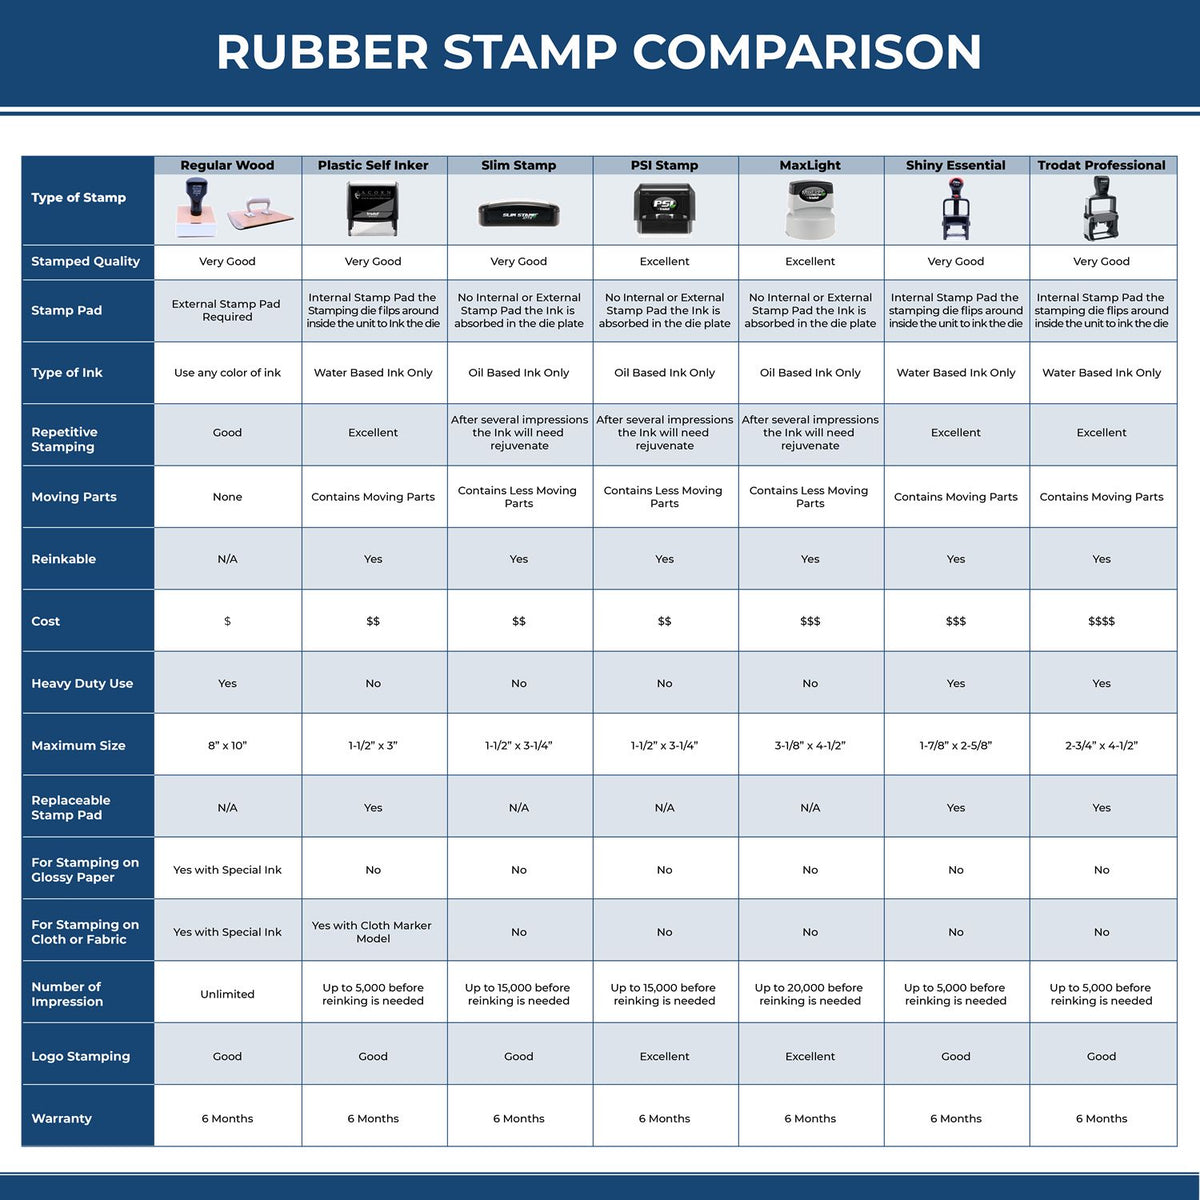 Large Self-Inking Bold X-Rays Stamp 5590S Rubber Stamp Comparison